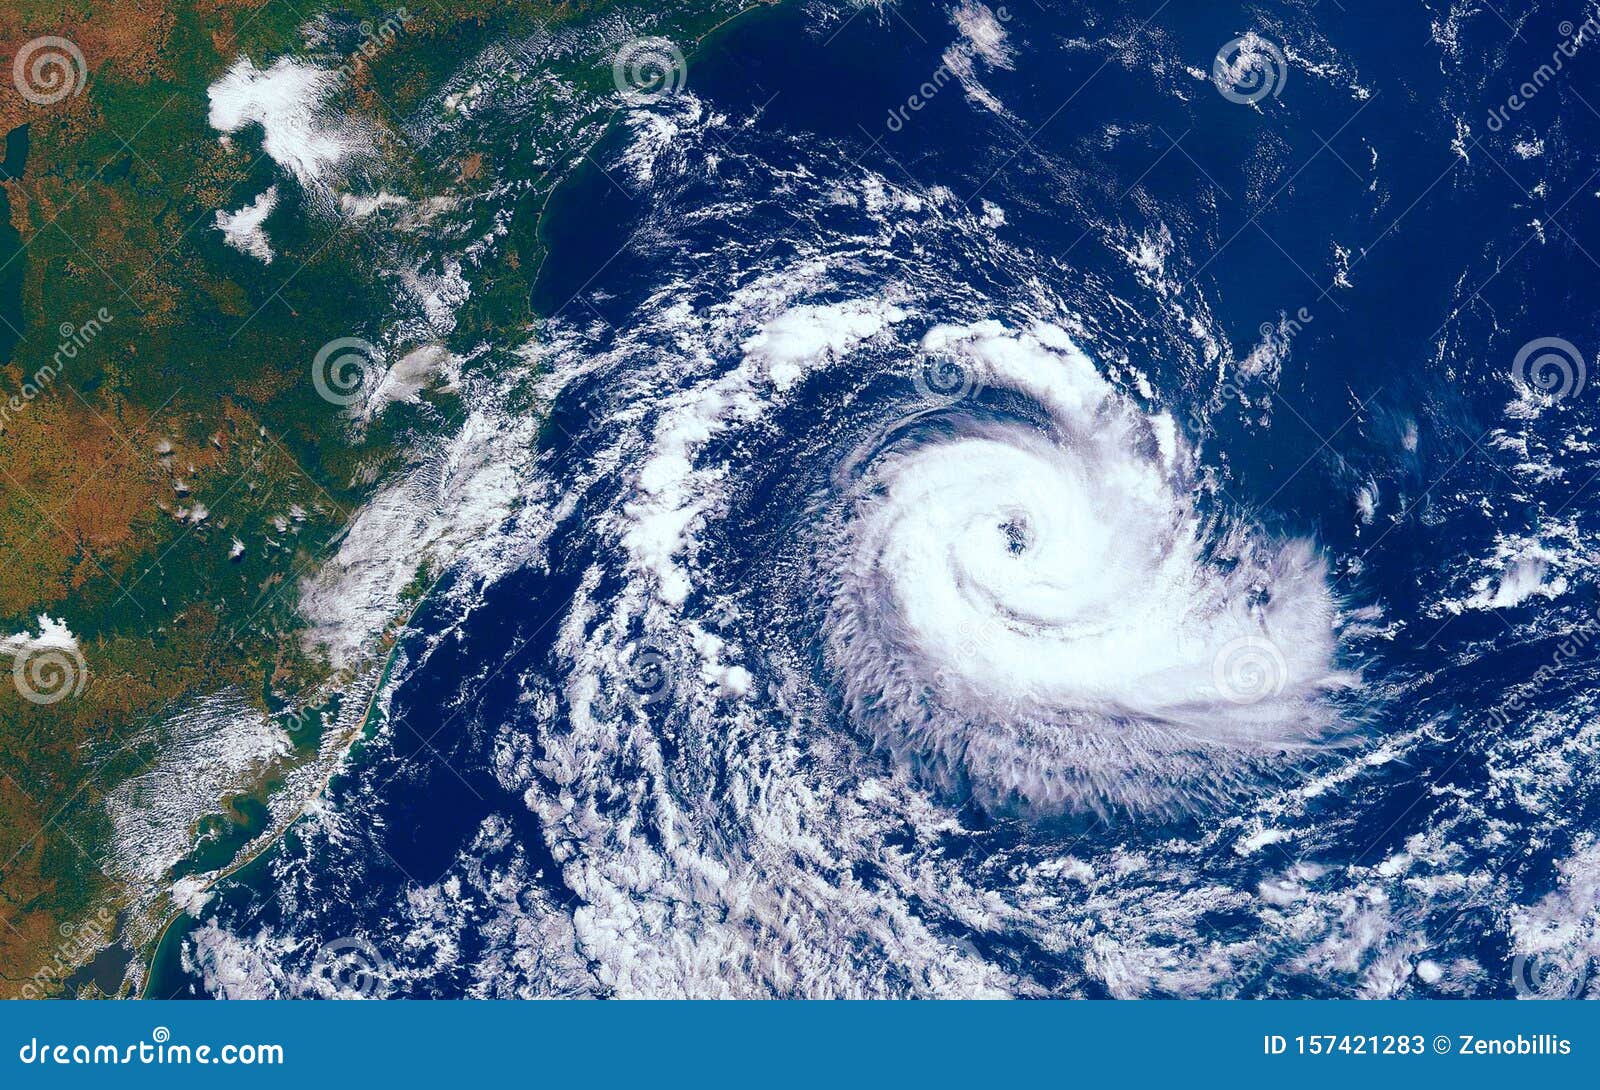 category 5 super typhoon from outer space view. the eyewall of the hurricane